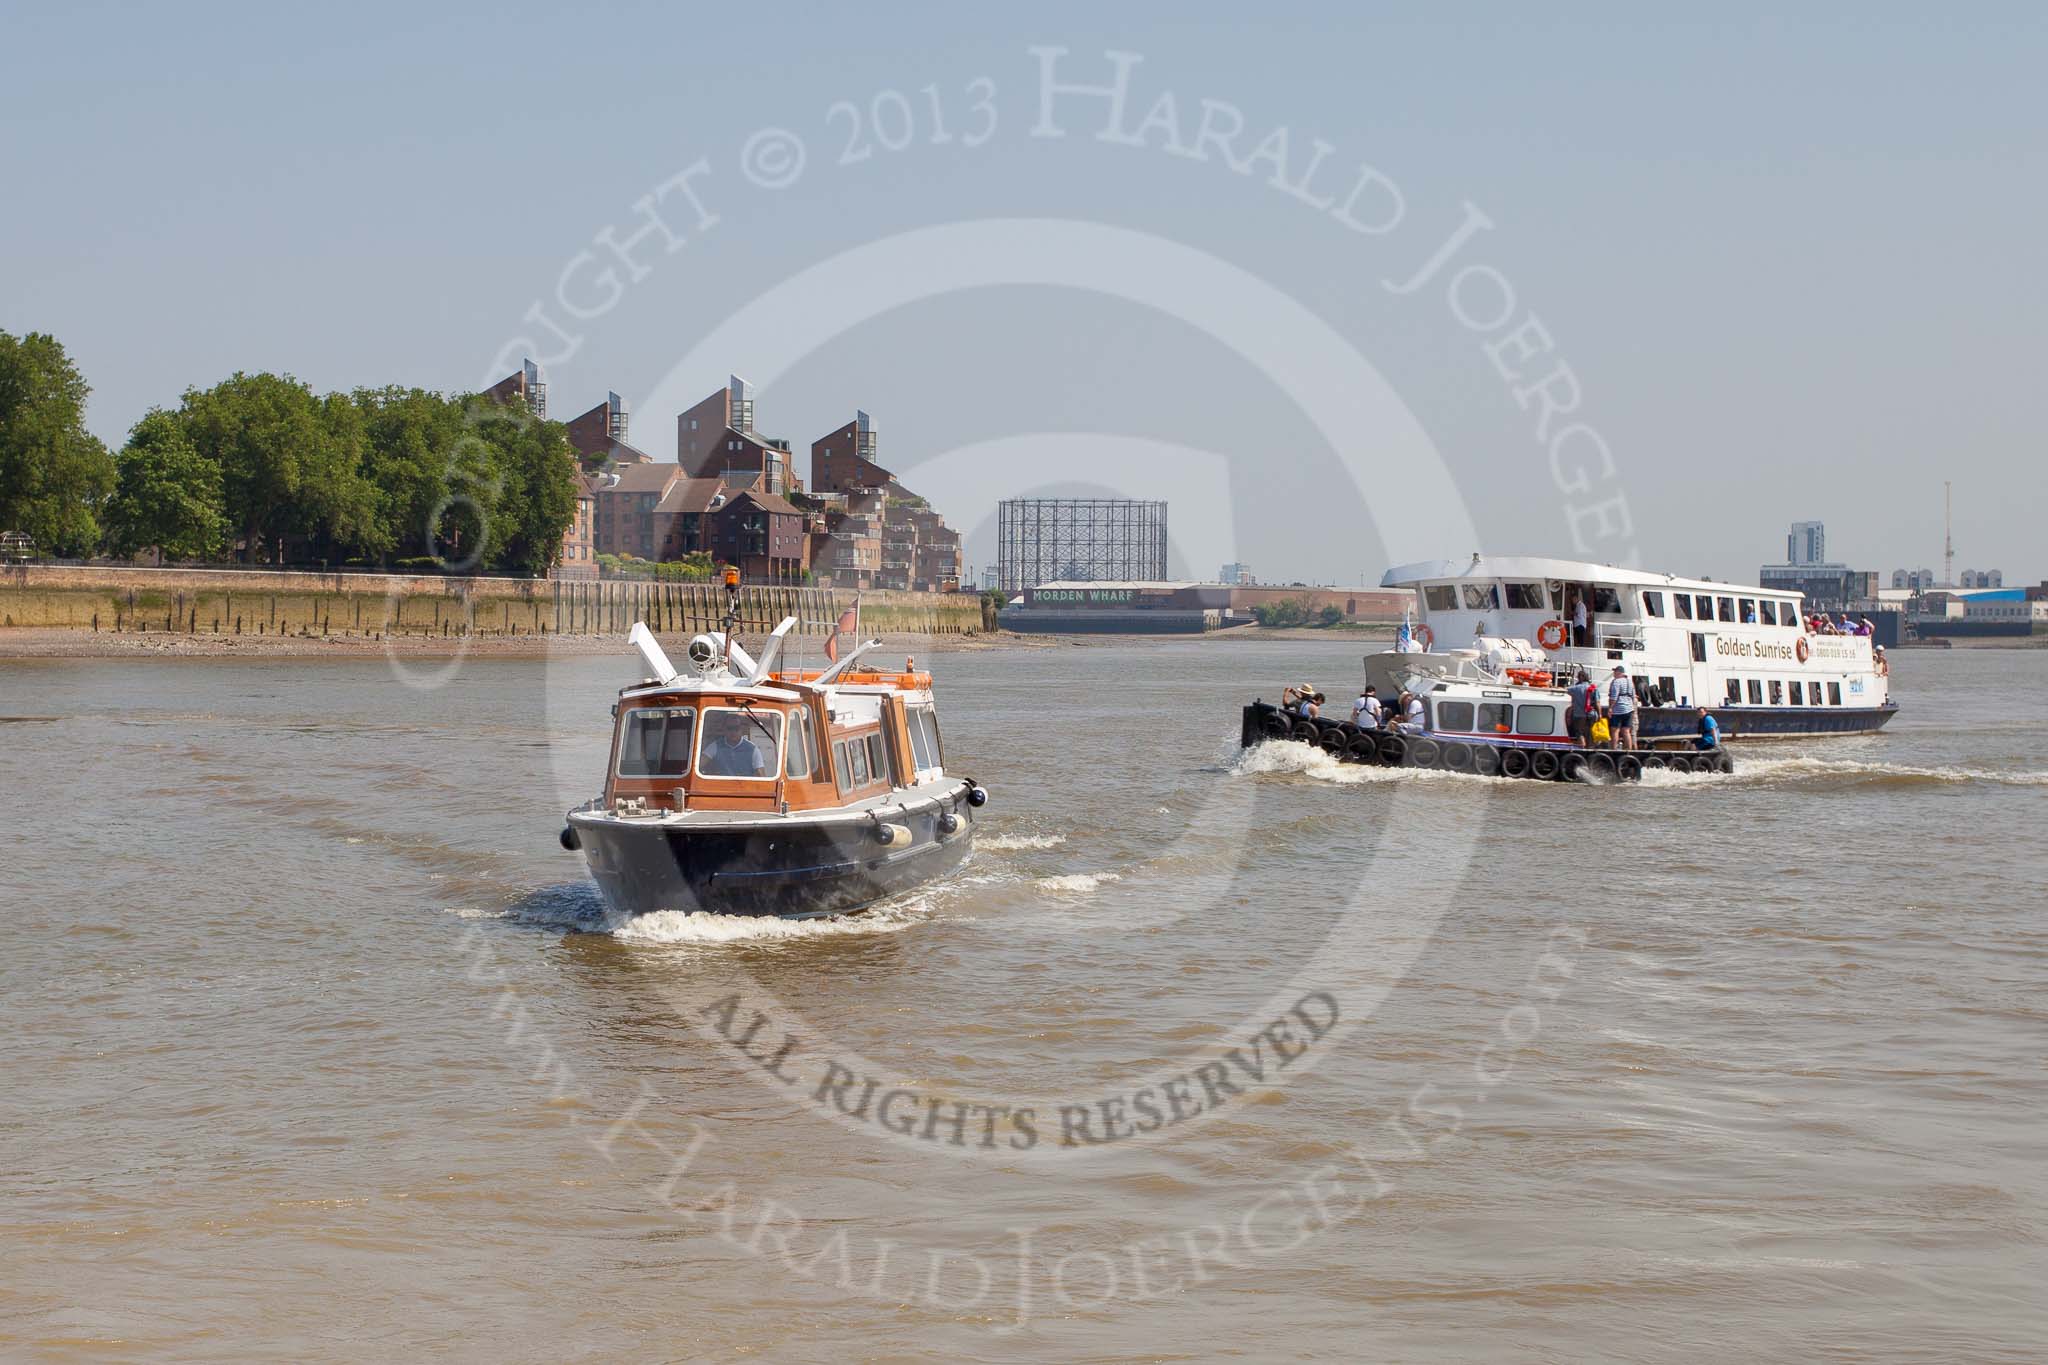 TOW River Thames Barge Driving Race 2013: The high speed Thames Launch "John Harriot", by Thames Executive Charters, arriving at Greenwich pier to pick up the umpire and the the photographer..
River Thames between Greenwich and Westminster,
London,

United Kingdom,
on 13 July 2013 at 11:11, image #25